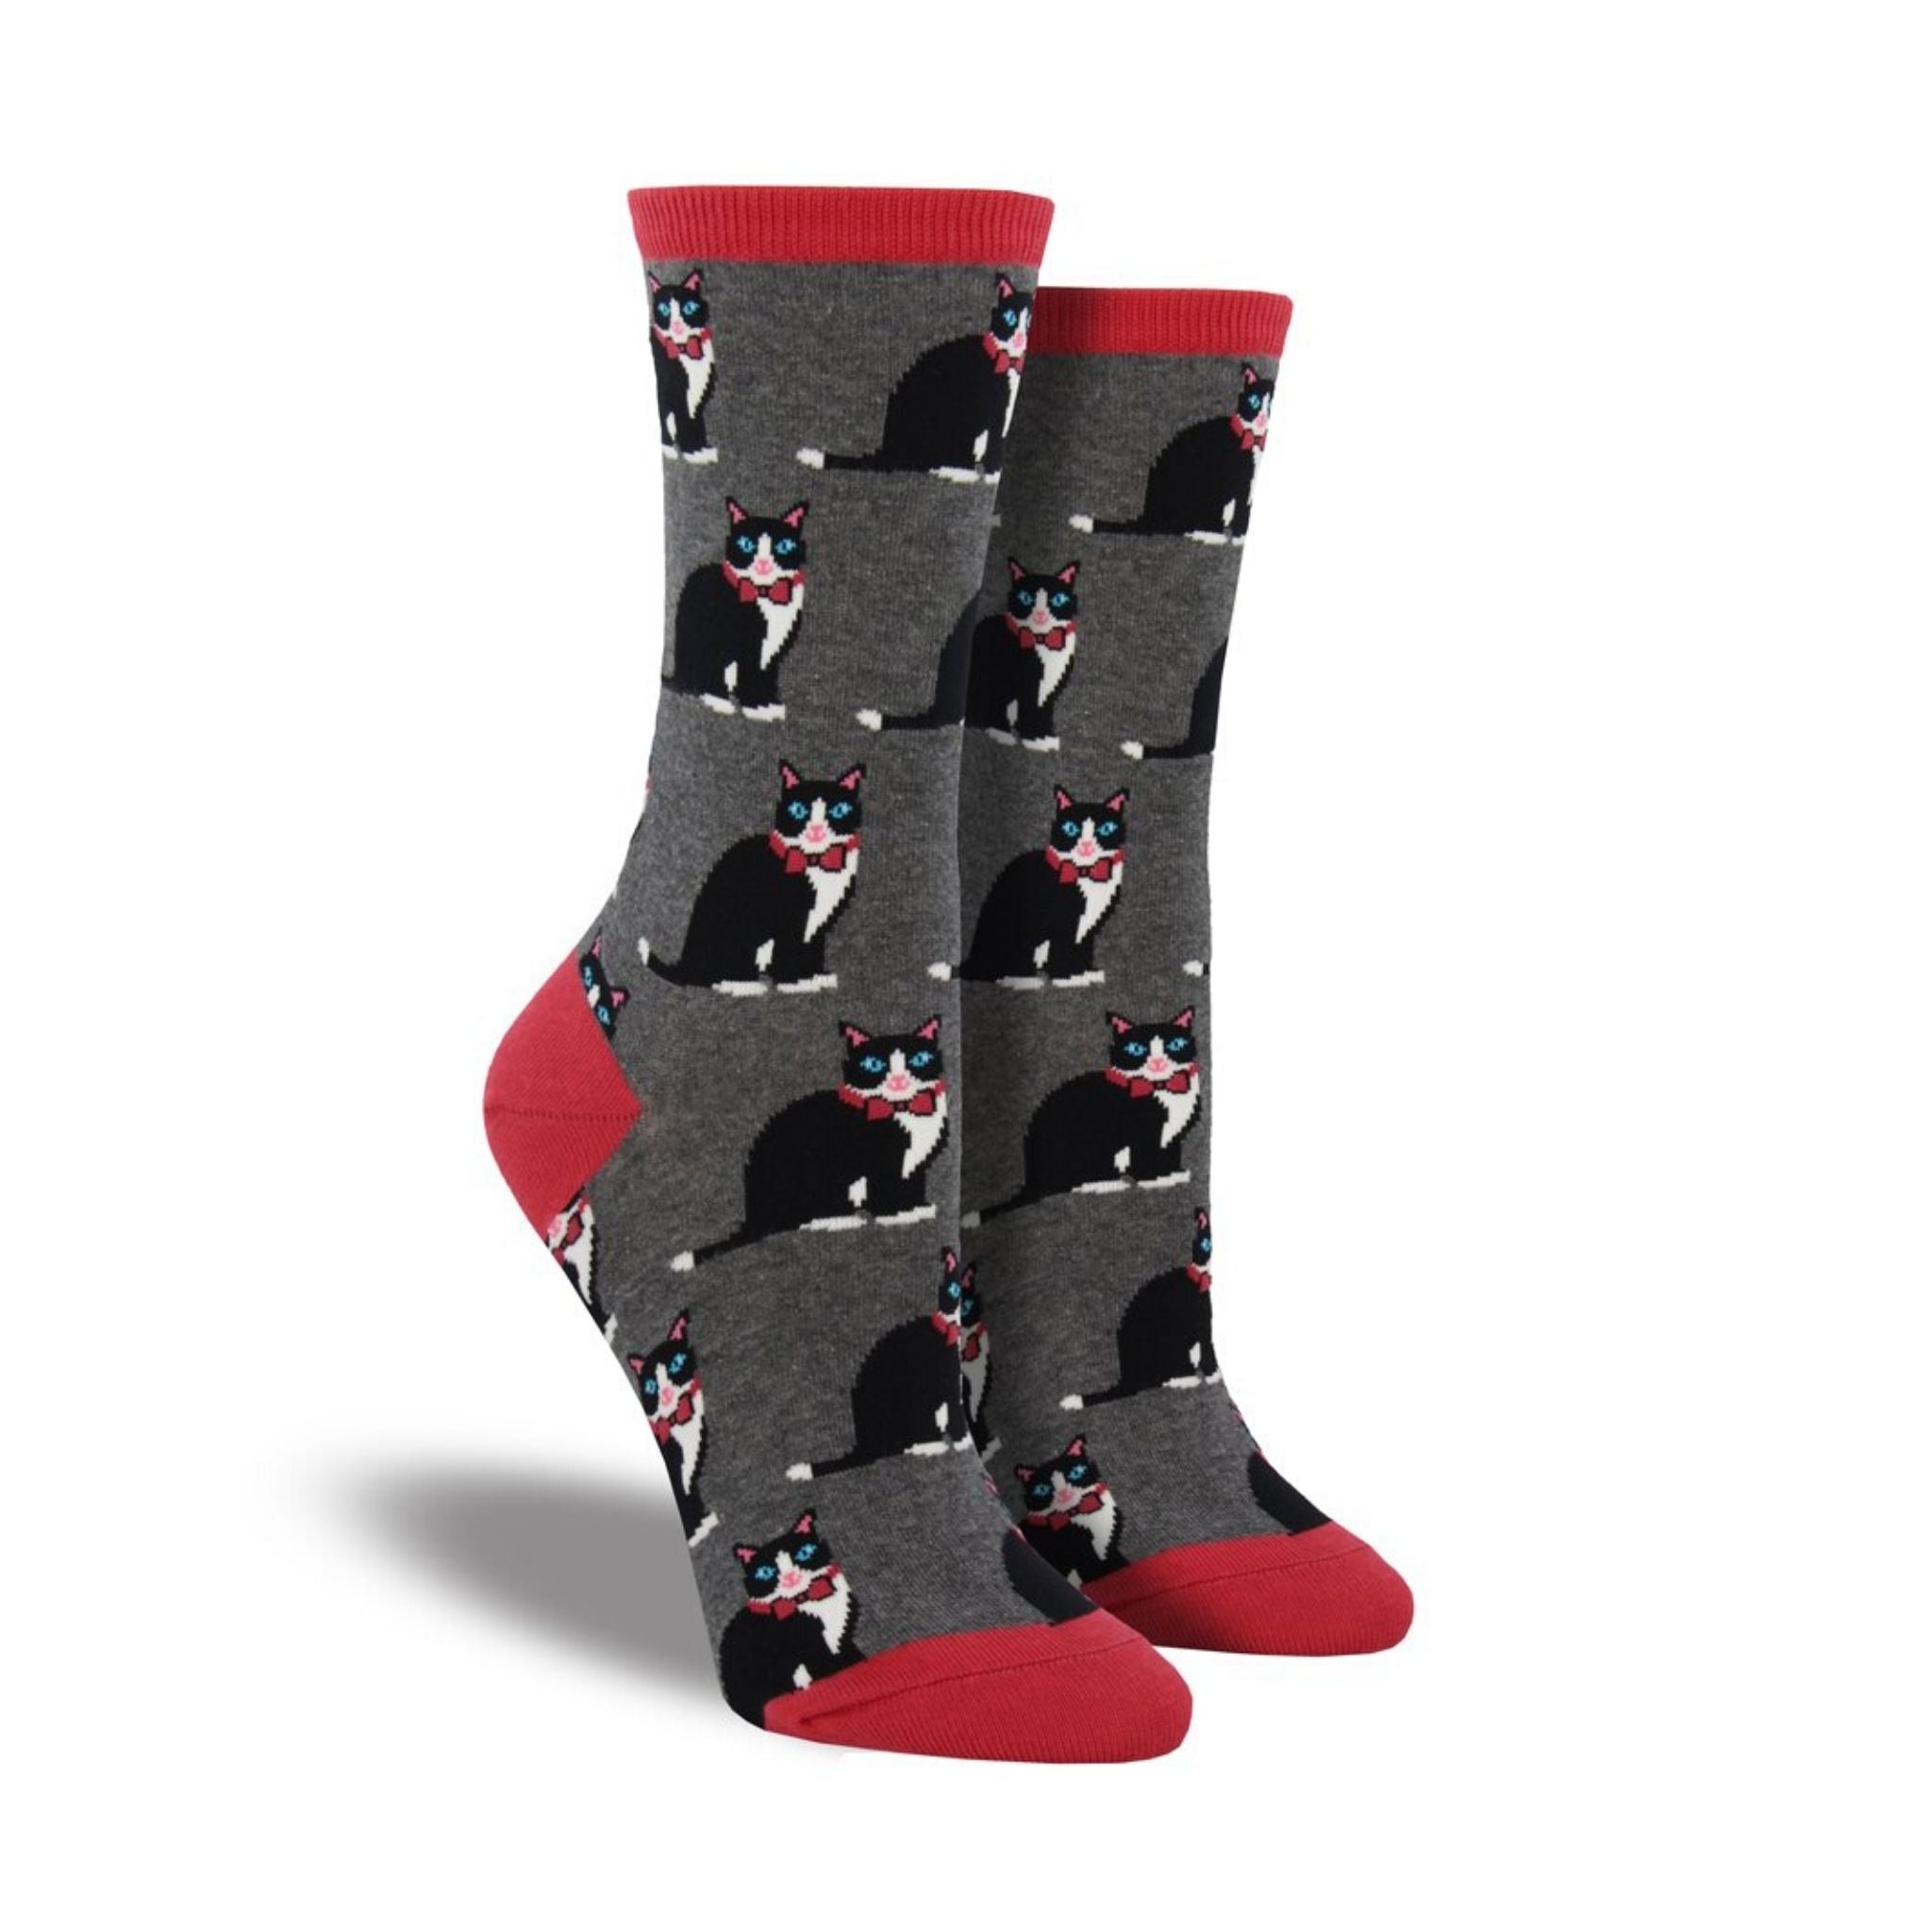 Grey socks with red accents featuring black cats wear ties